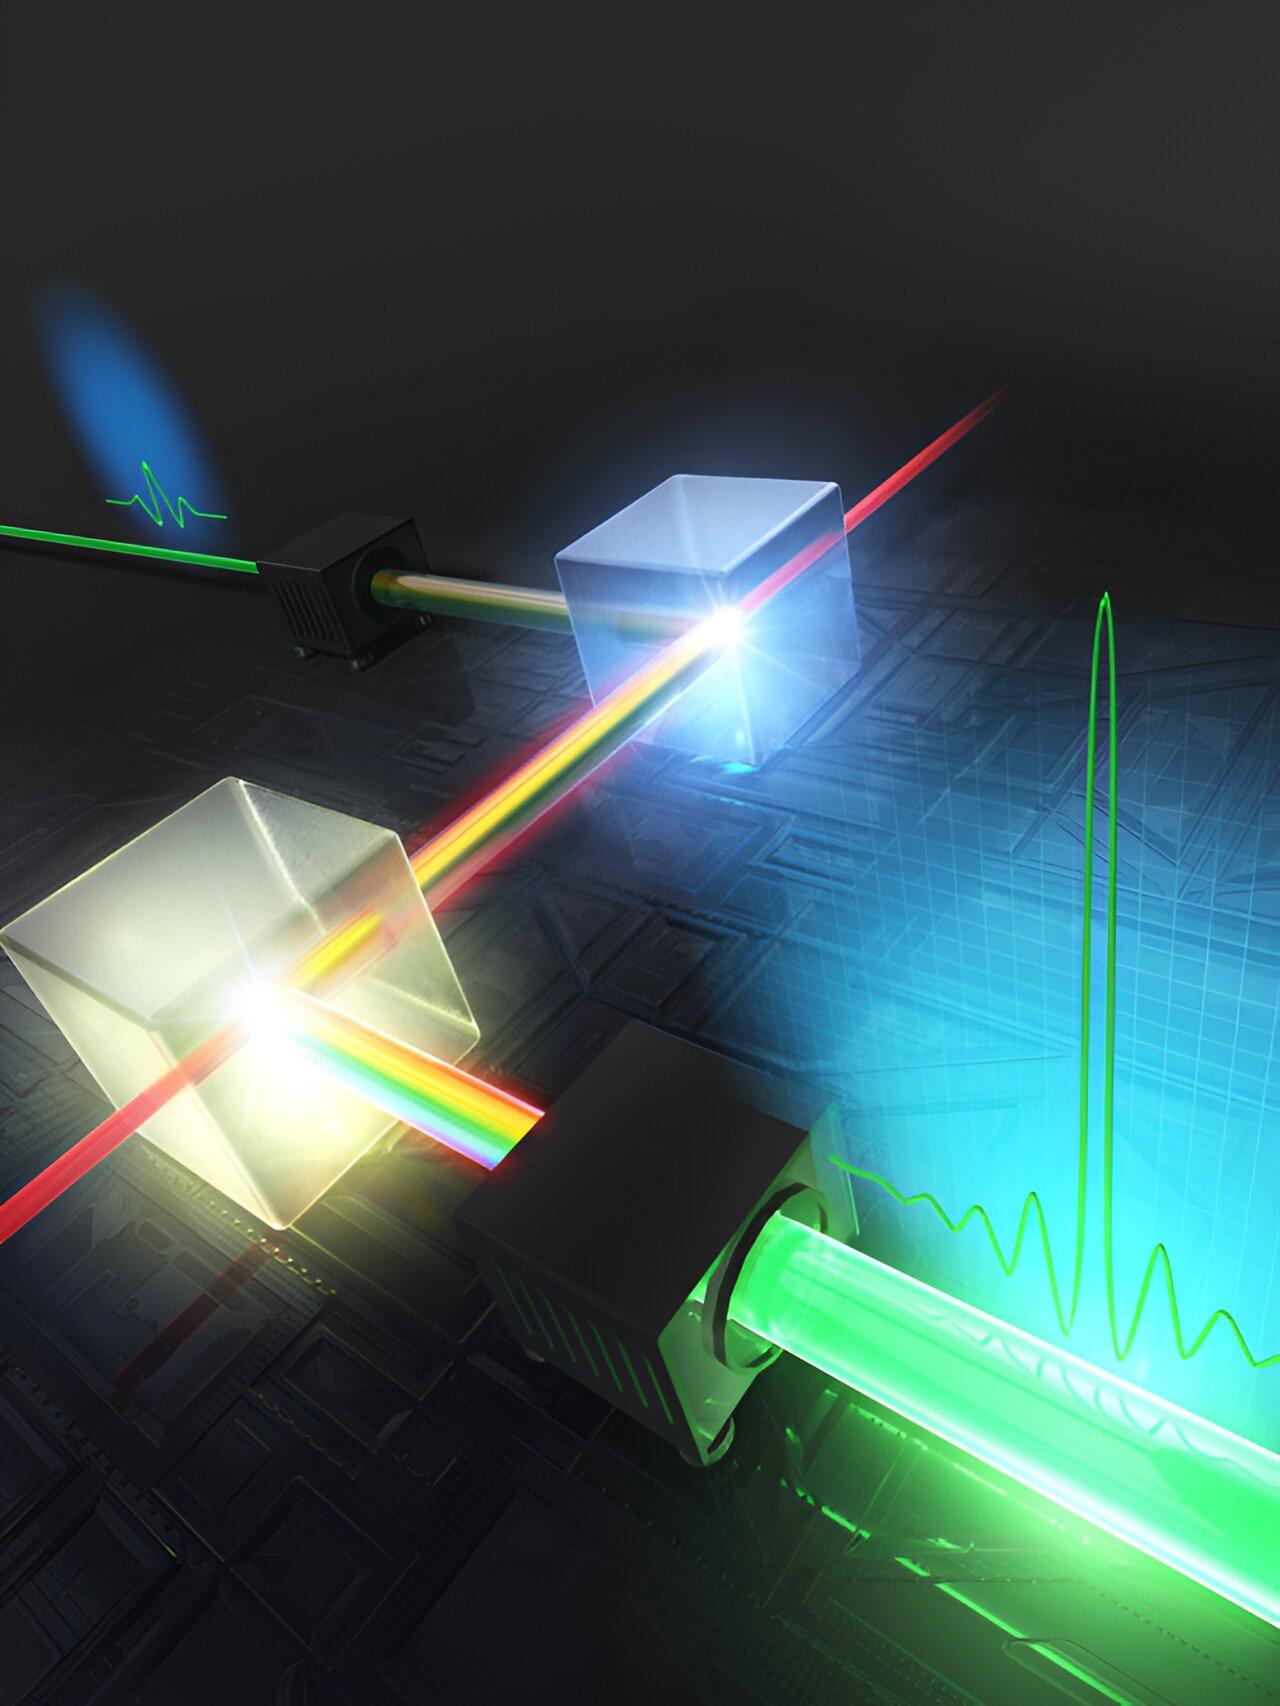 Attosecond imaging made possible by short and powerful laser pulses